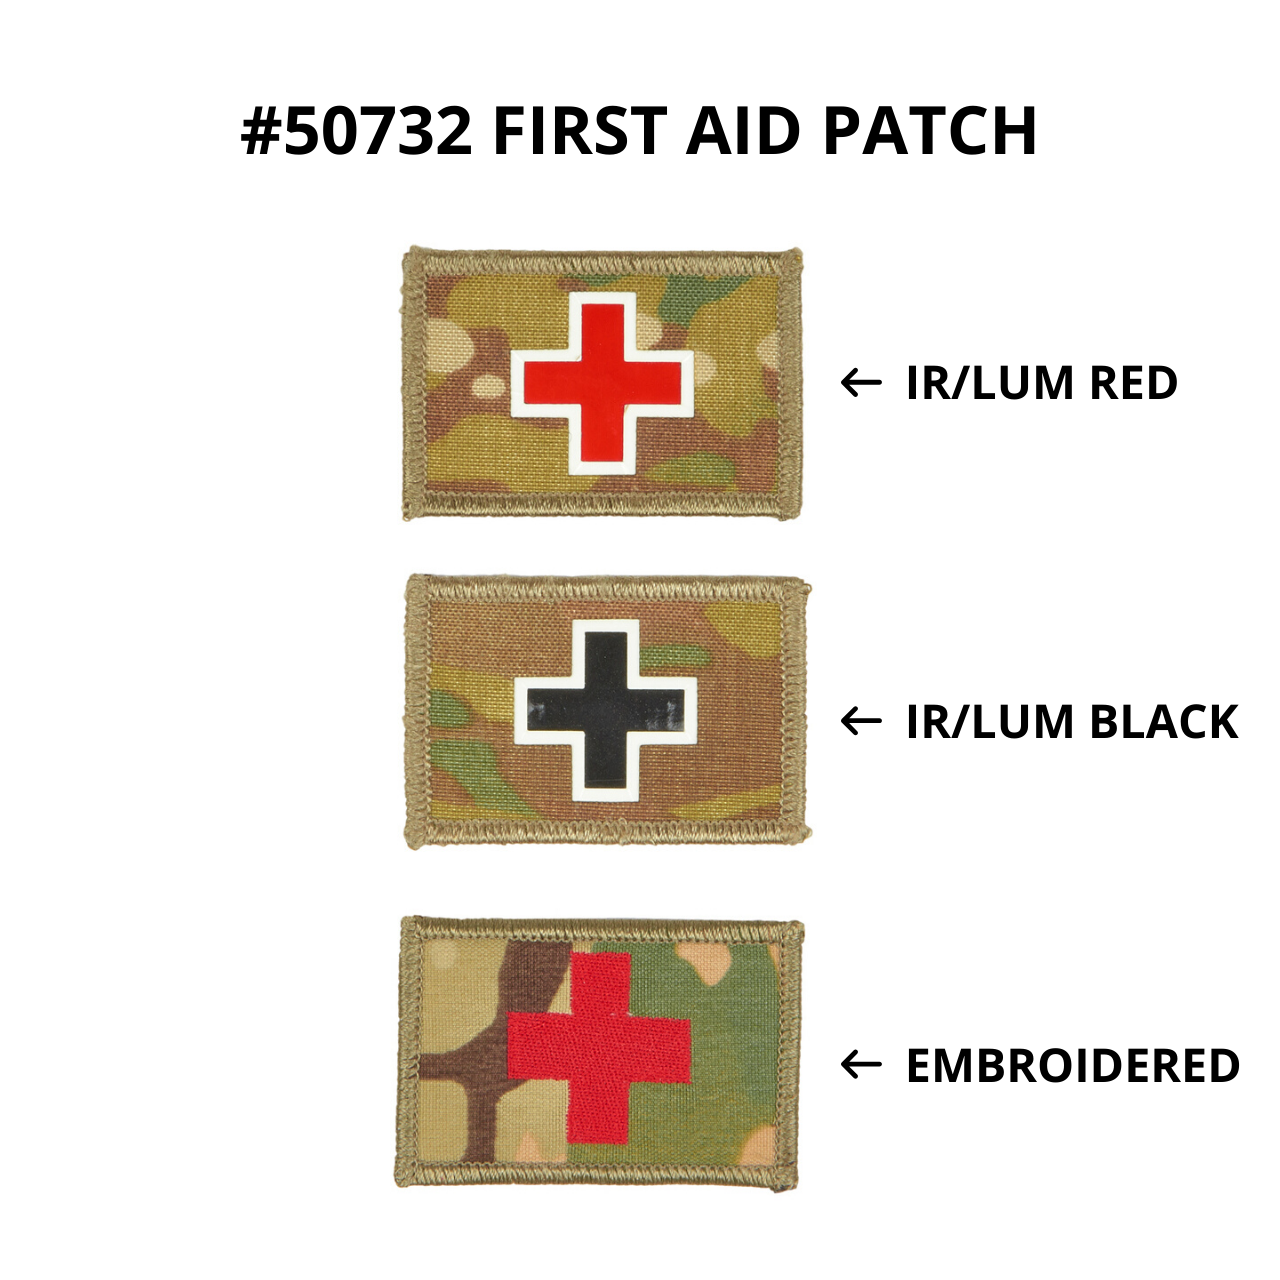 50732 first aid patches